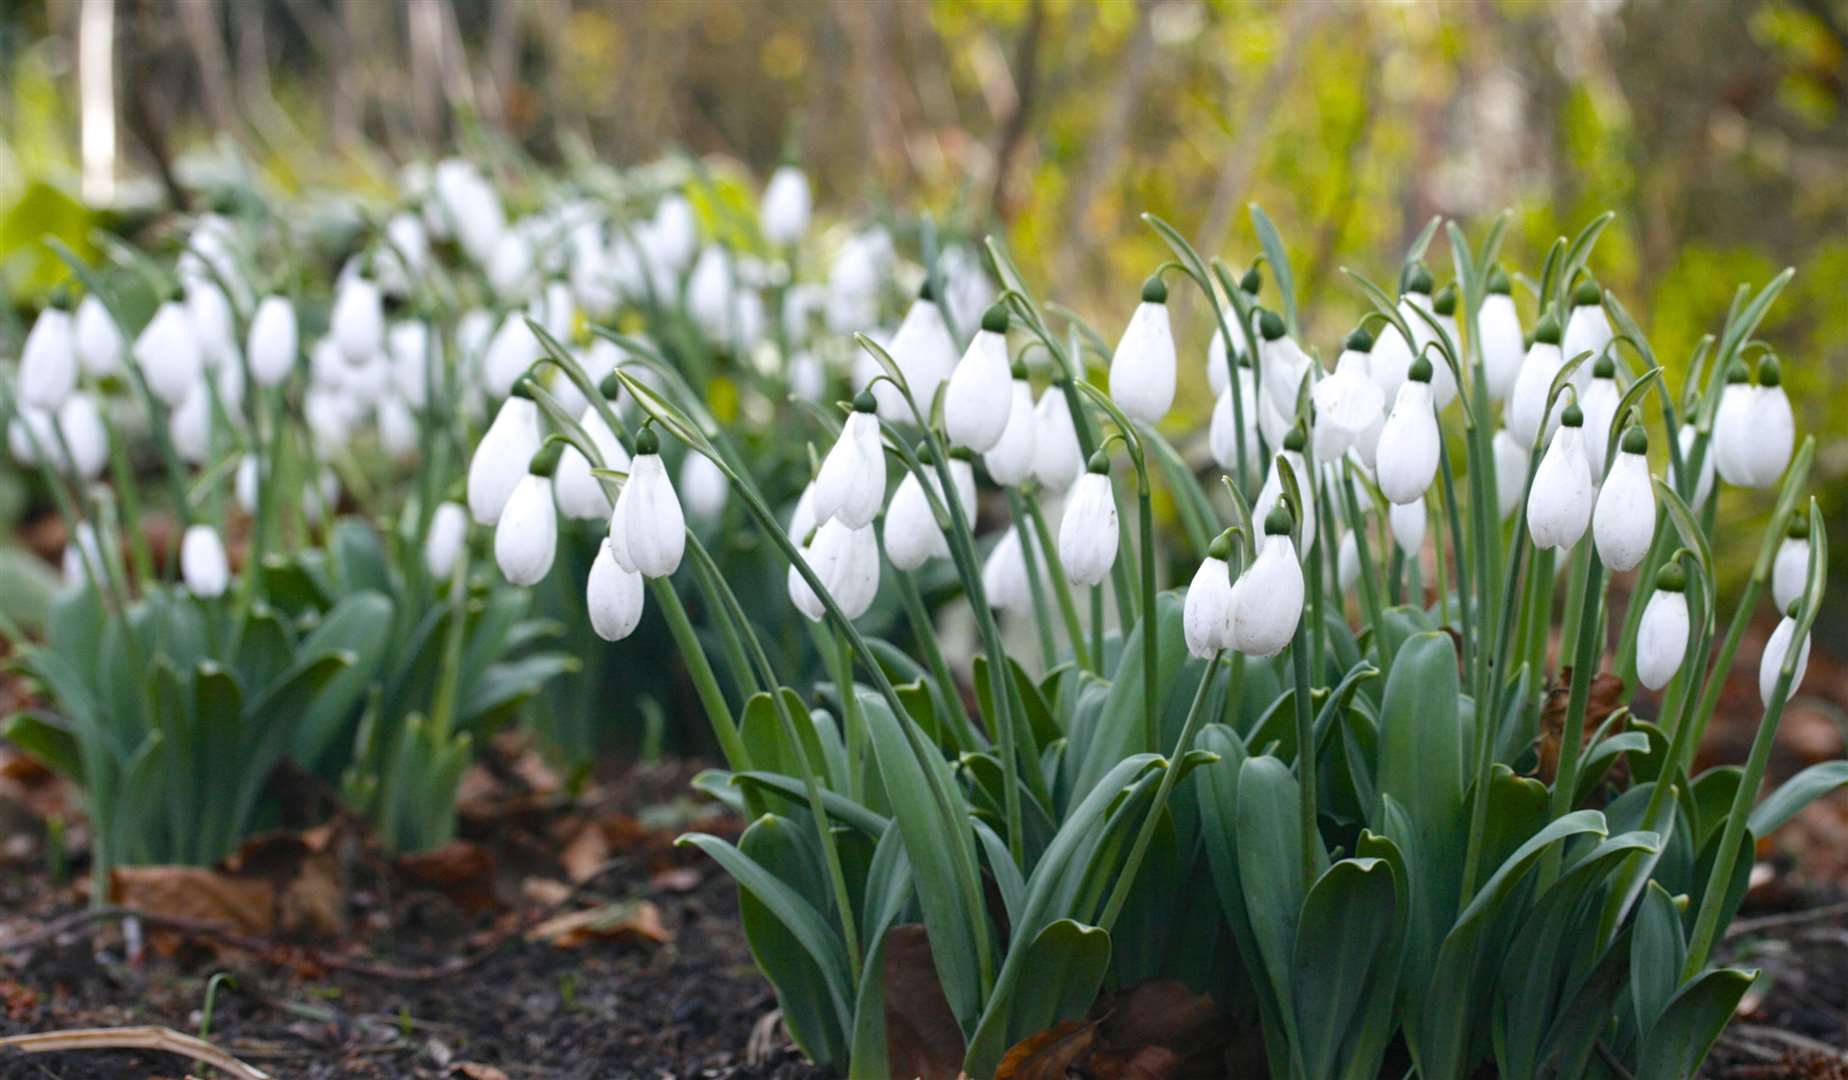 Snowdrops sprawl out across the gardens at Doddington Place. Picture: Vikki Rimmer